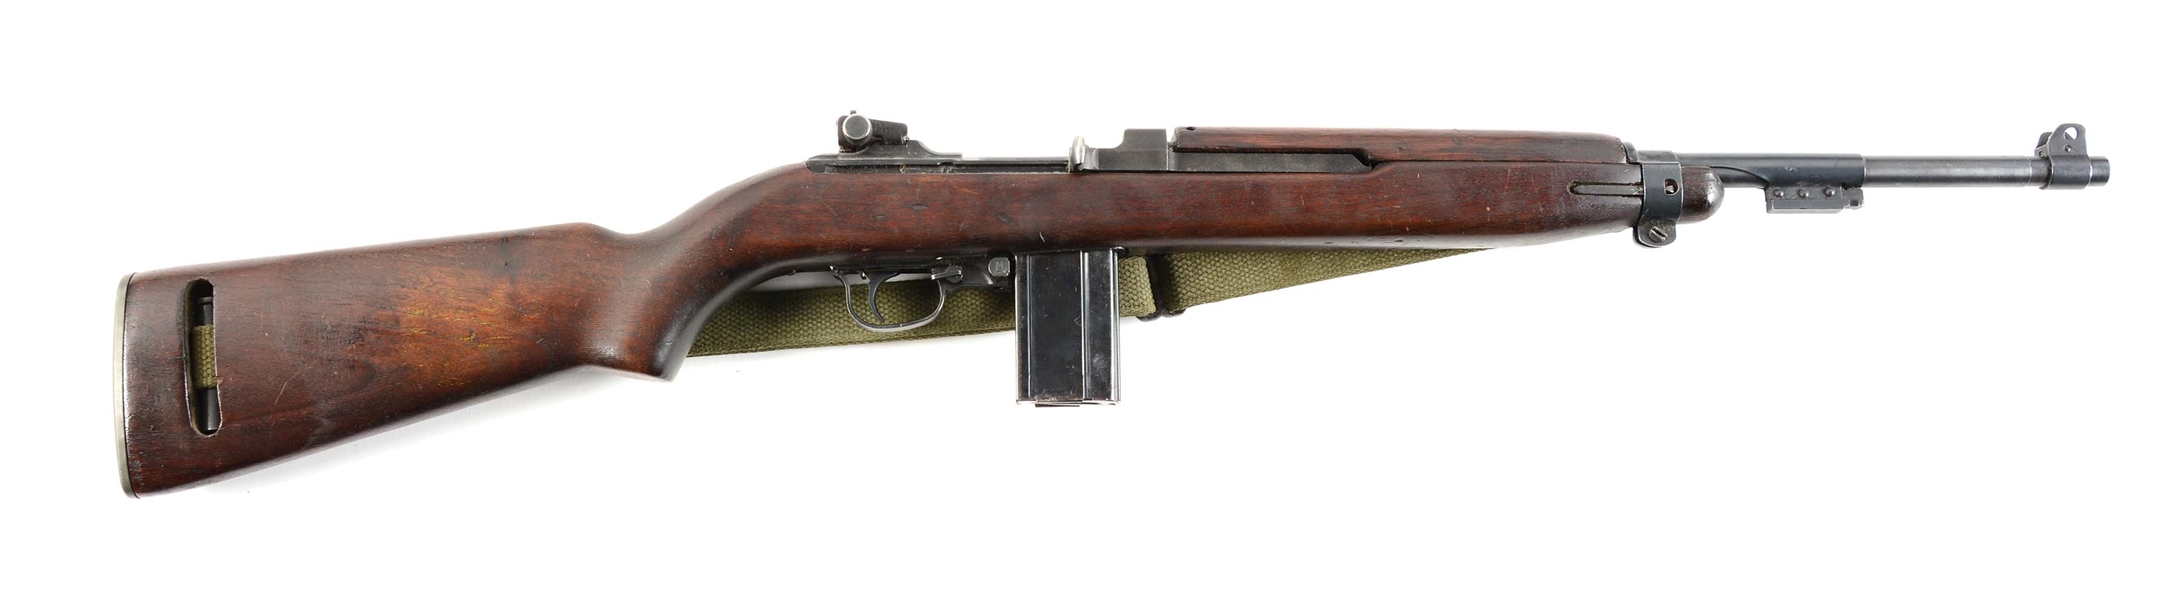 (C) US M1 CARBINE .30 SEMI AUTOMATIC RIFLE WITH POST CANVAS CARRY BAG AND MUZZLE COVER.